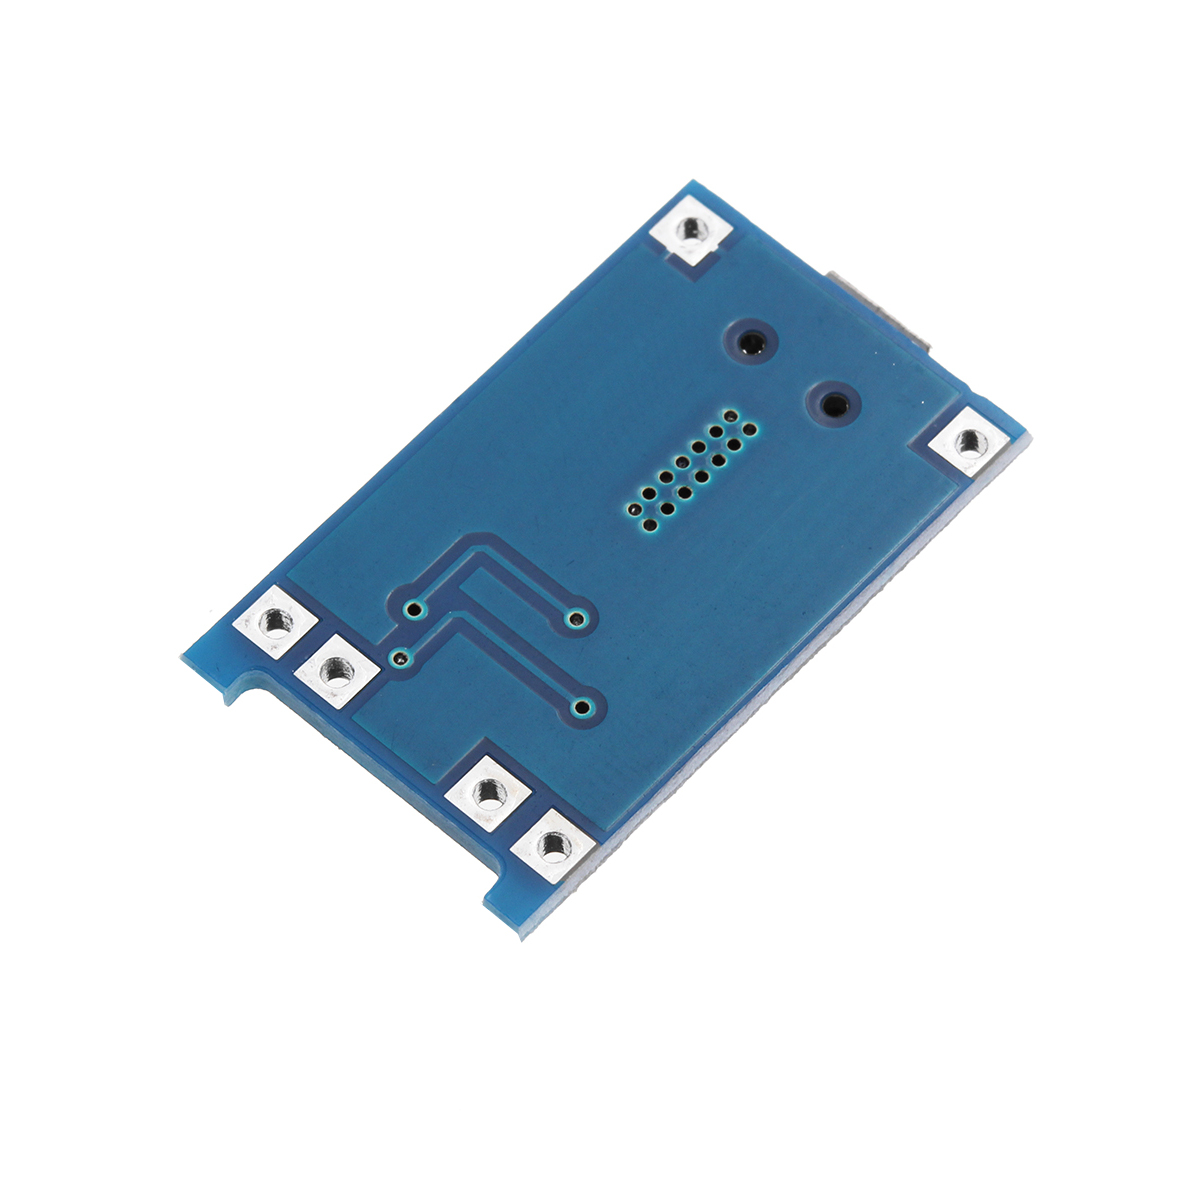 TP4056-Micro-USB-5V-1A-Lithium-Battery-Charging-Protection-Board-TE585-Lipo-Charger-Module-1225993